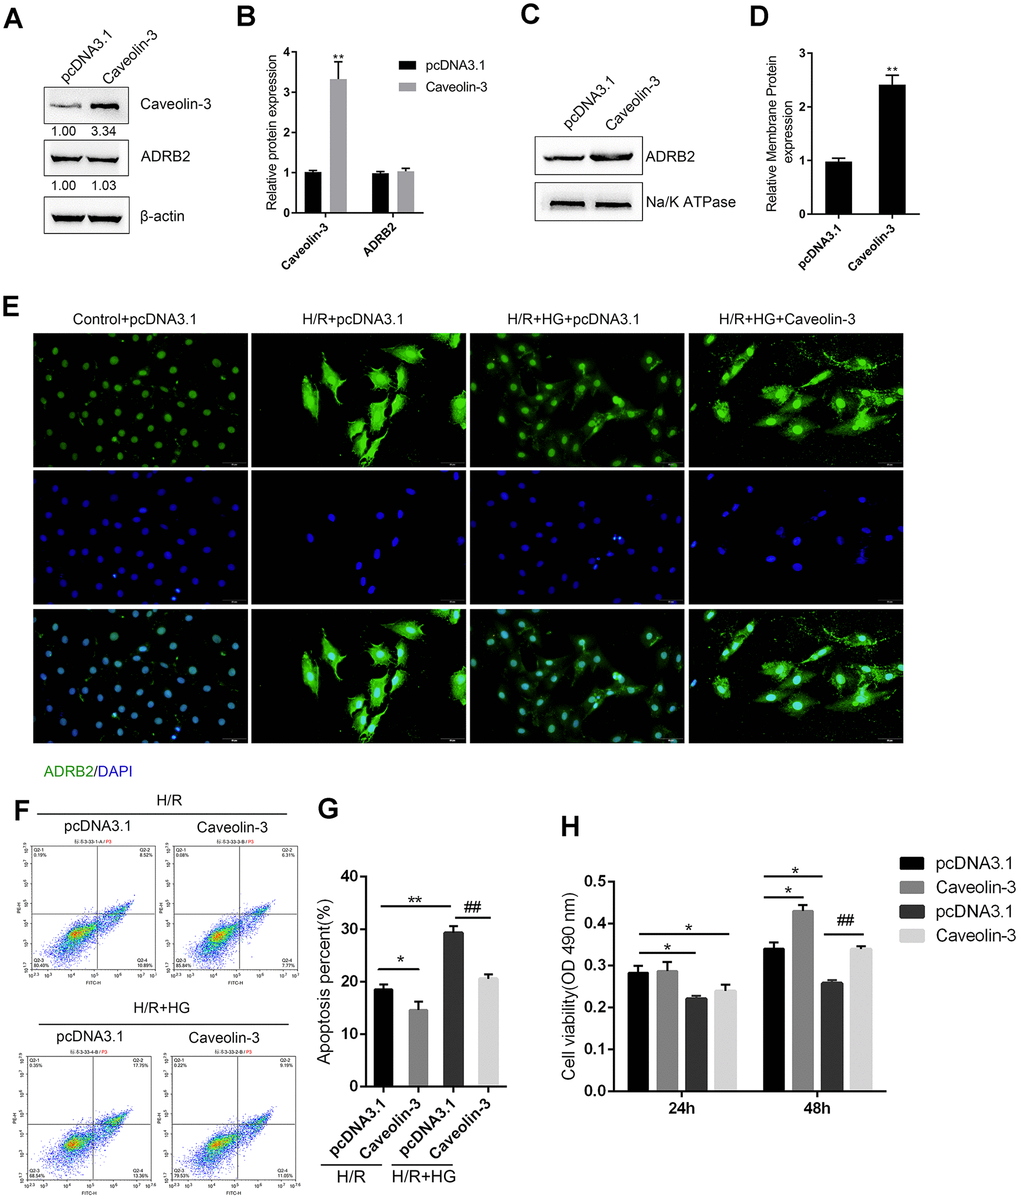 Caveolin-3 promotes the localization of β2AR onto the cytomembrane of H9C2 cells. (A, B) H9C2 cells were transfected with pcDNA3.1/Caveolin-3 to conduct Caveolin-3 overexpression. The total protein levels of Caveolin-3 and ADRB2 in Caveolin-3-transfected cells were determined using immunoblotting, (n=3). (C, D) The membrane protein levels of ADRB2 in Caveolin-3-transfected cells were determined using immunoblotting, (n=3). (E) The content and distribution of ADRB2 protein in the control, H/R, H/R + HG, and H/R + HG + Caveolin-3 groups determined by IF staining, (n=3). (F–H) H9C2 cells were transfected with pcDNA3.1/Caveolin-3 under H/R or HG stimulation and examined for cell apoptosis by Flow cytometry (n=3) and cell viability by MTT assay (n=5). *PPP